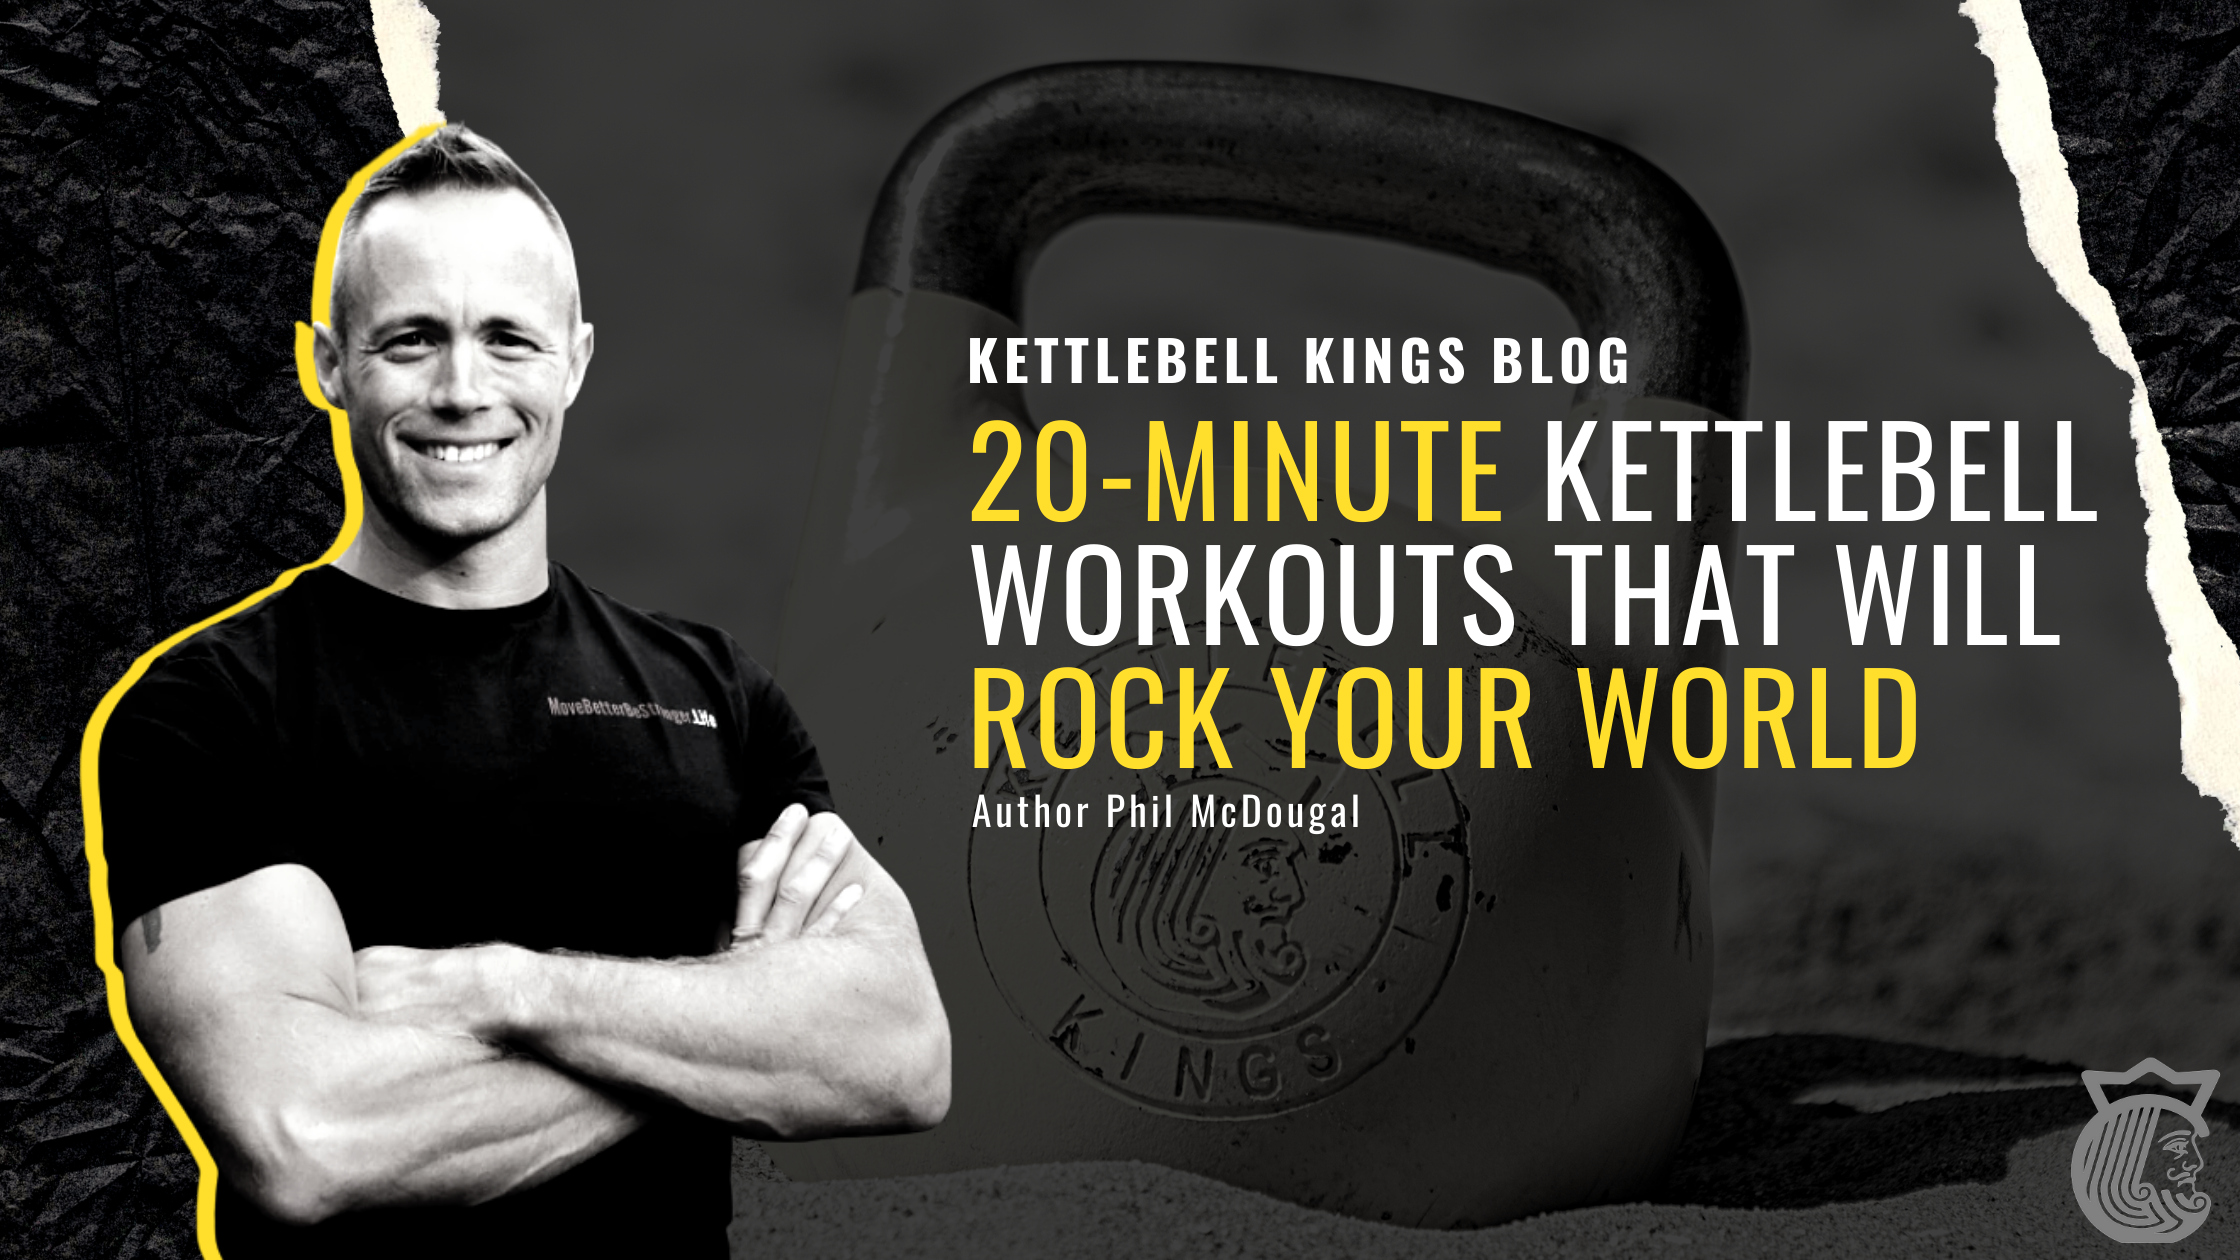 20-Minute Kettlebell Workouts That Will Rock Your World